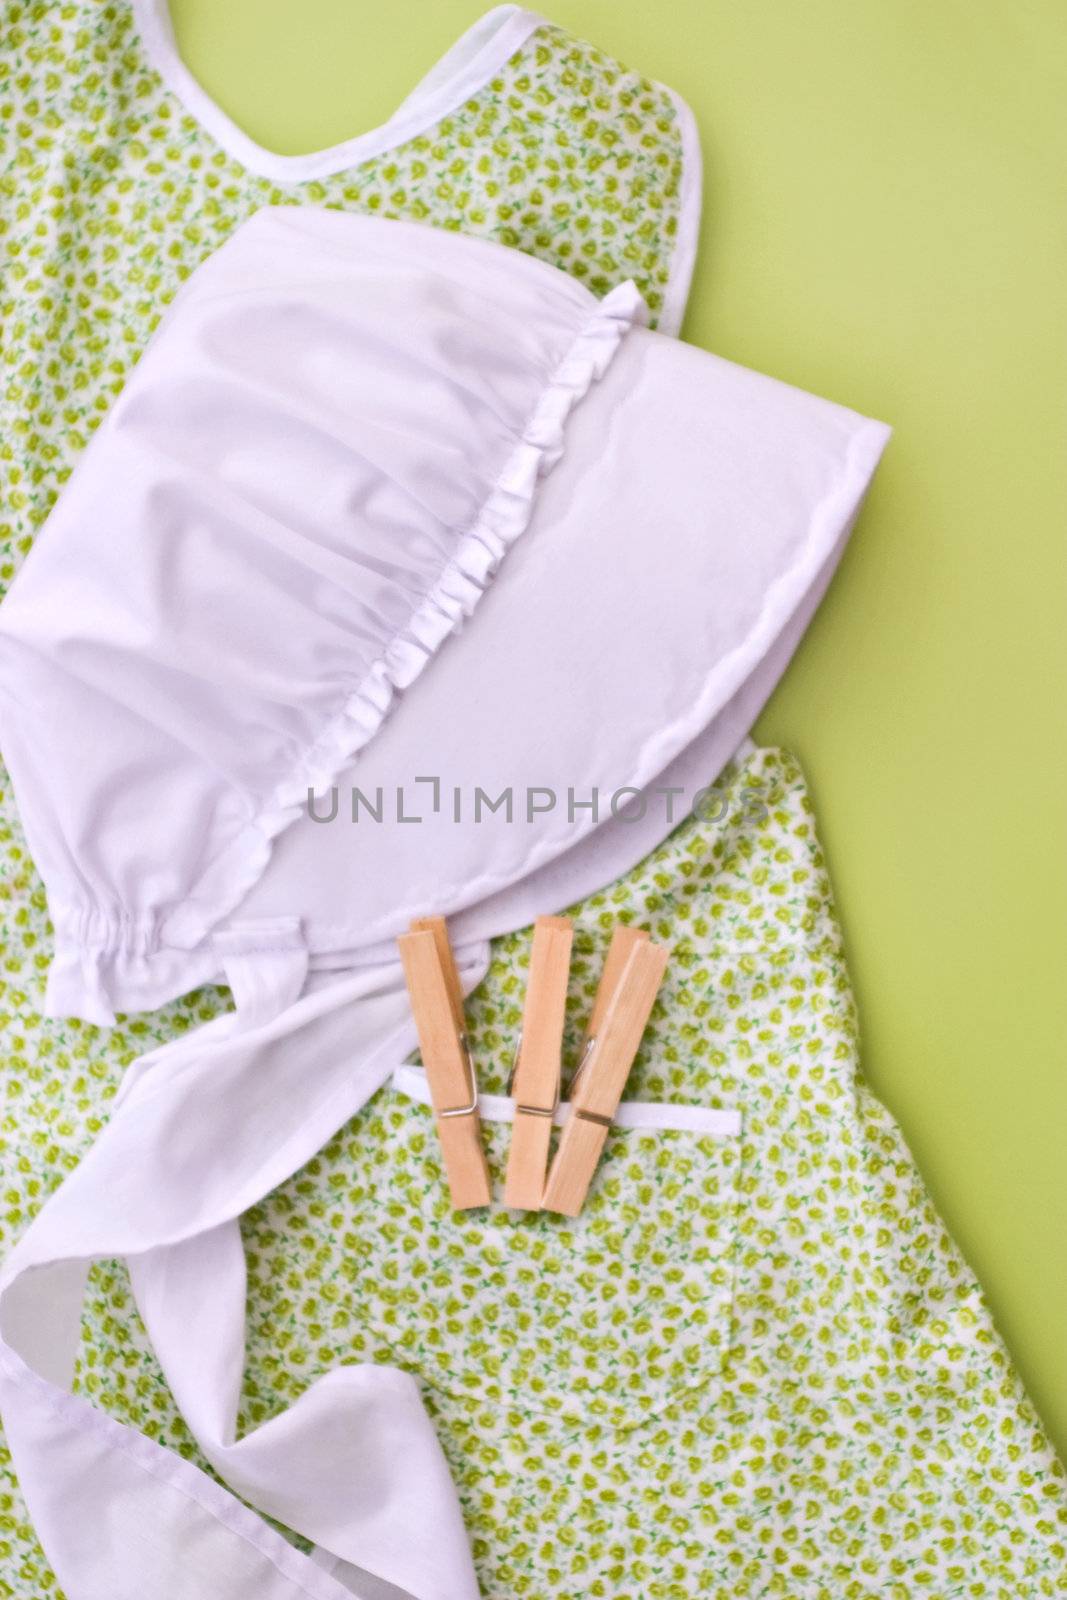 Amish child's clothes with bonnet and clothes pins.